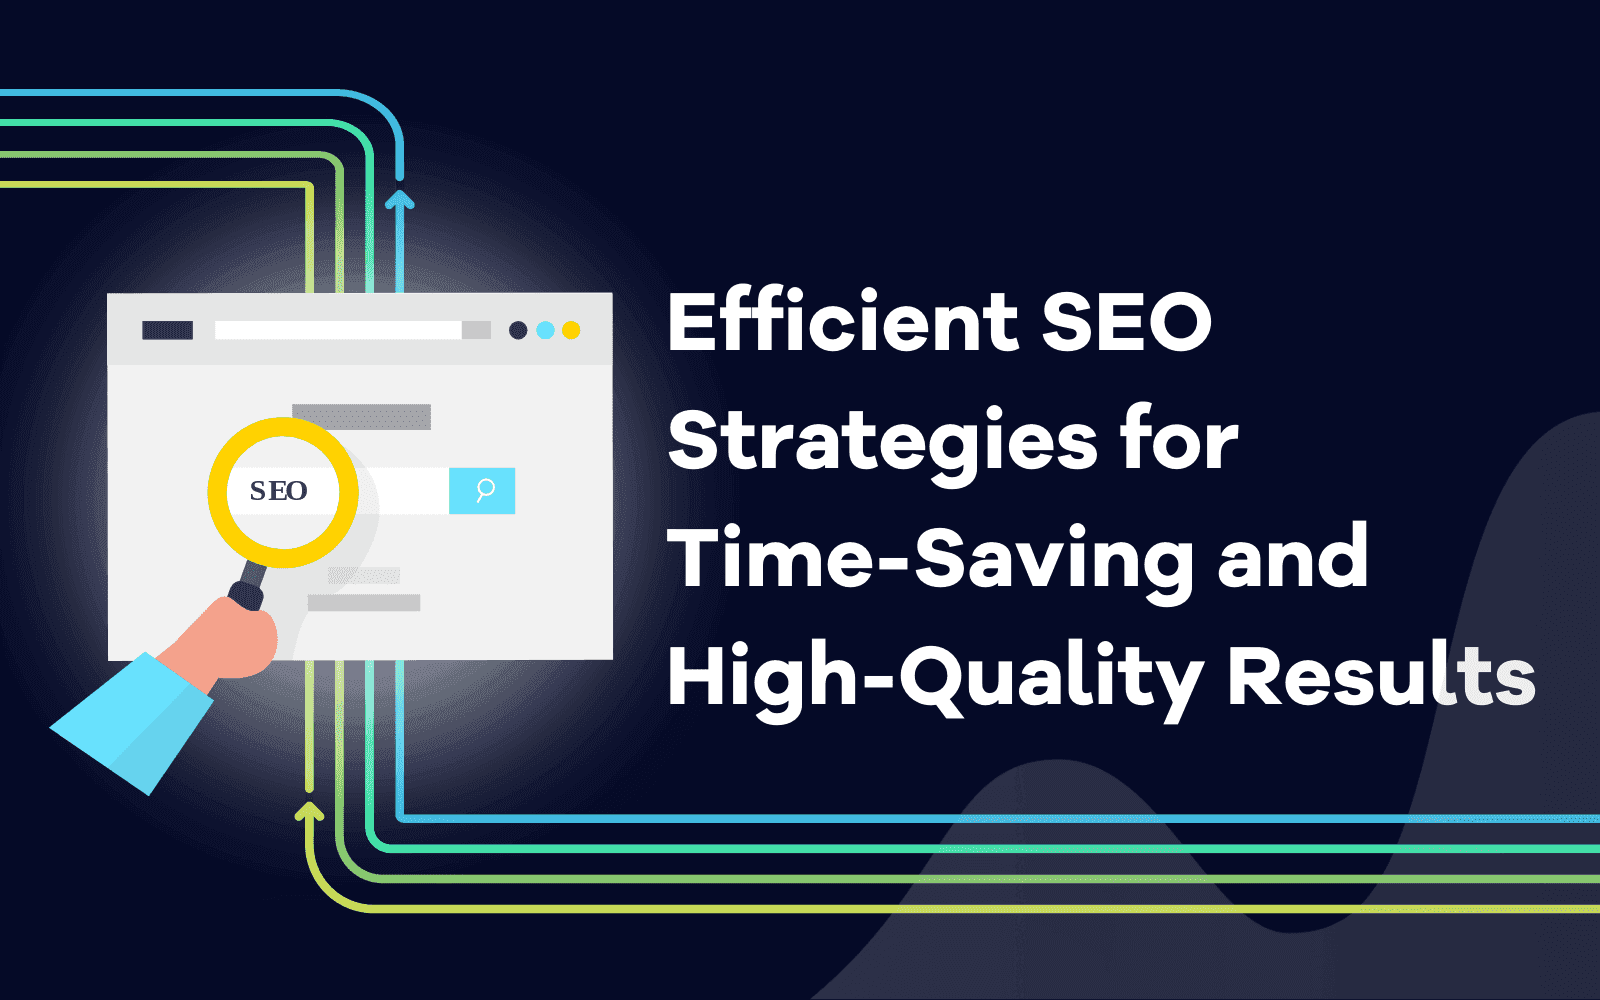 Efficient SEO Strategies for Time-Saving and High-Quality Results